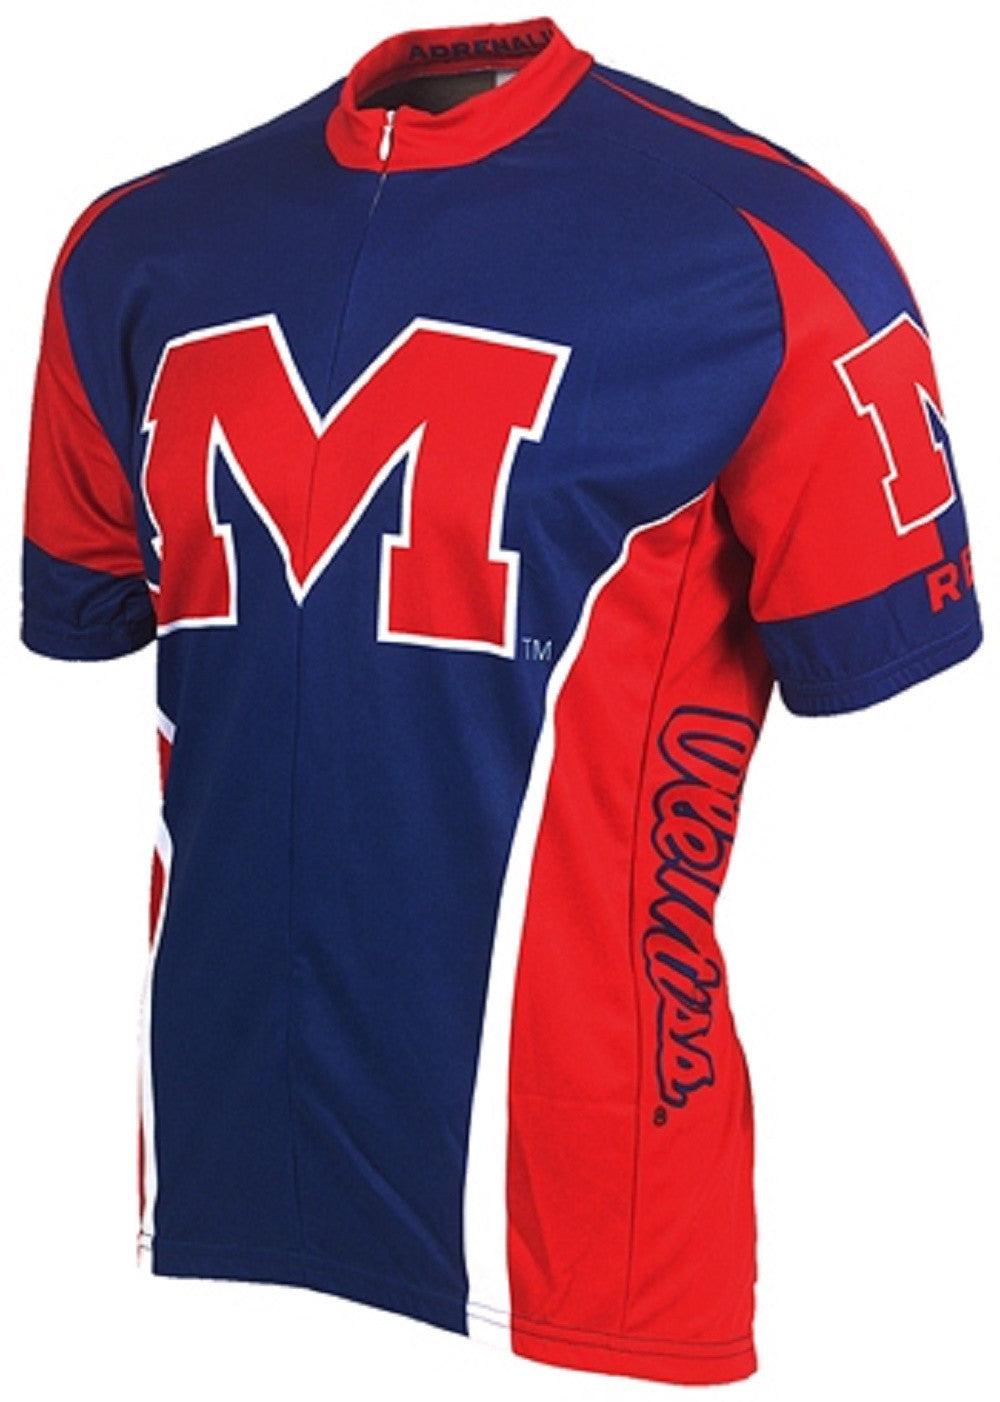 Mississippi Ole Miss Rebels Cycling Jersey (Small)